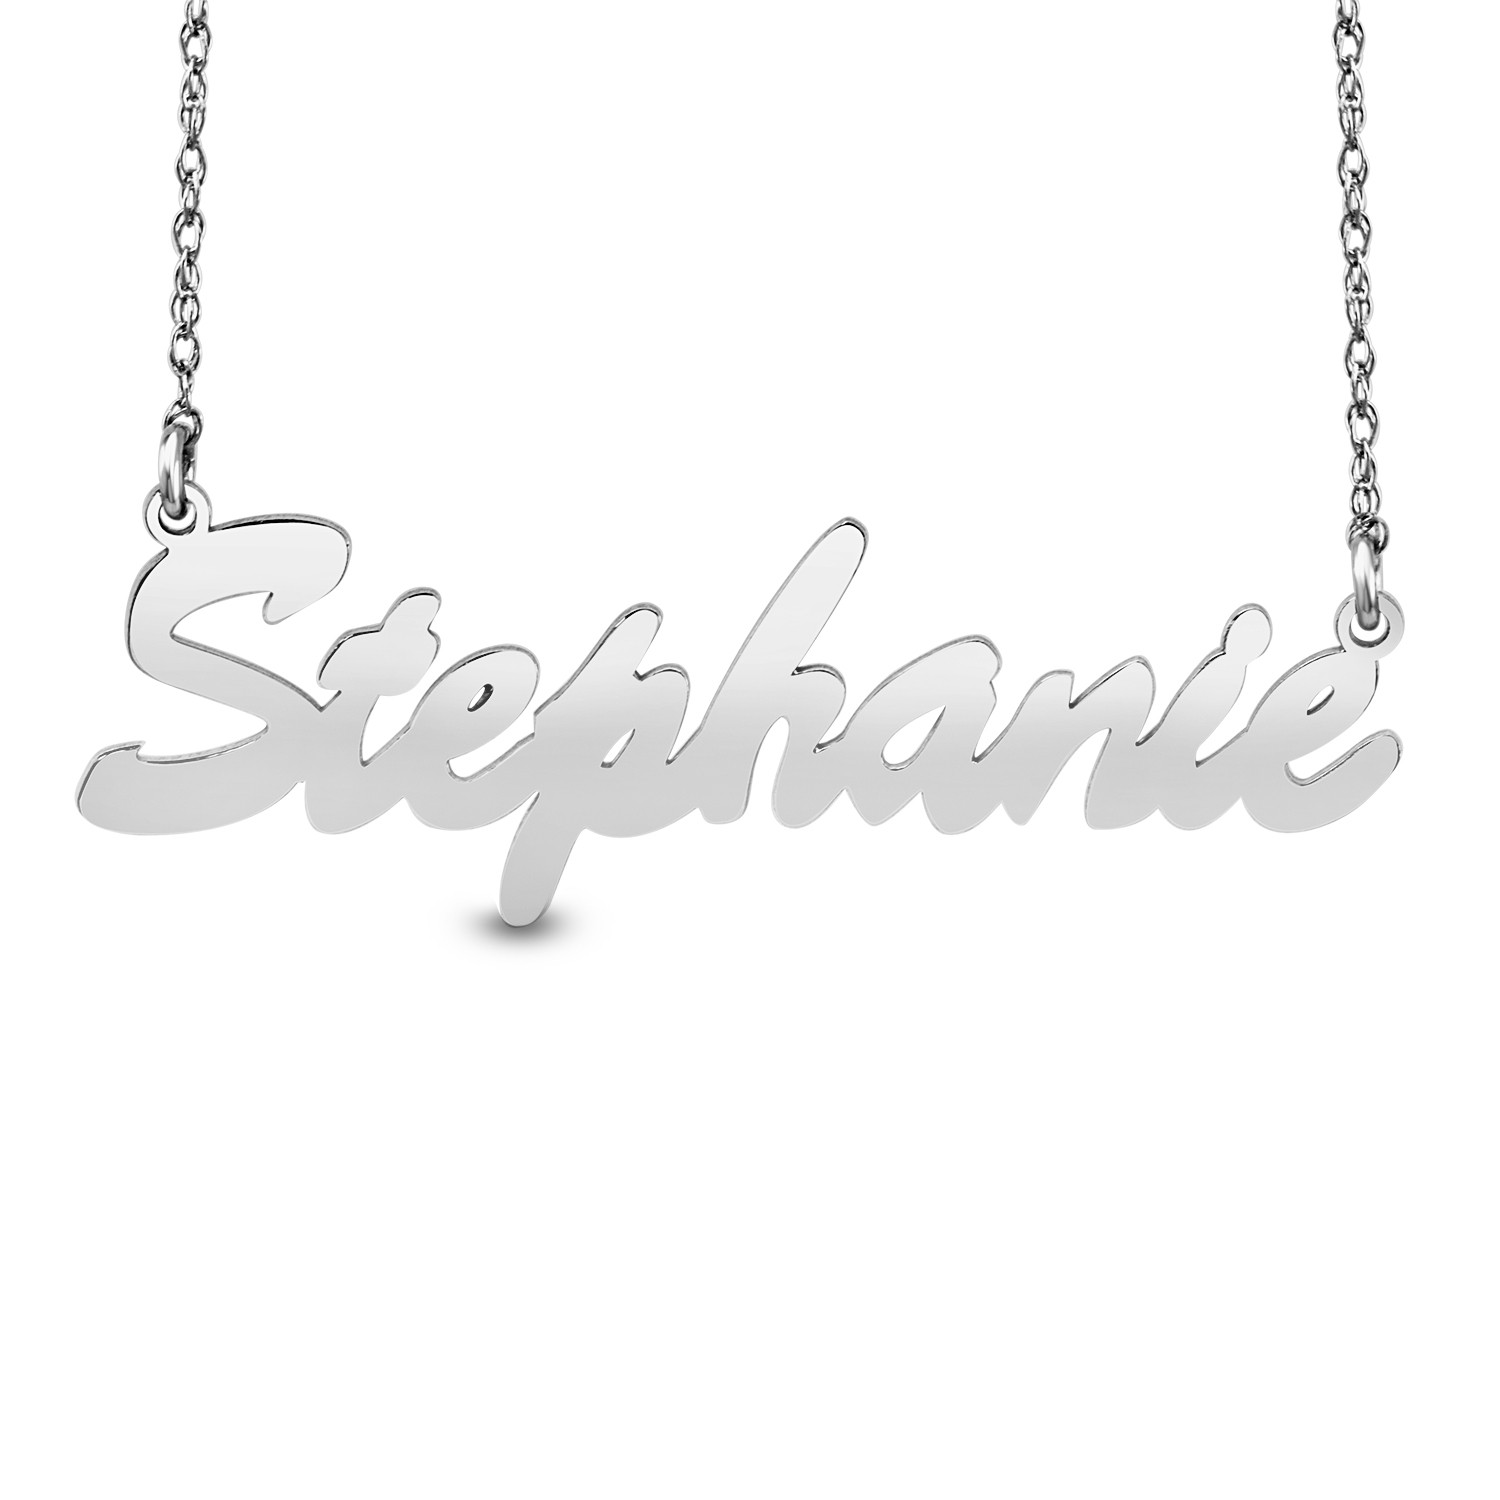 HI Polish Name Pers Necklace - 9 letter max 1 Uppercase letter (Example: Stephanie S=11.0mm x 1.75" e=6.33mm)